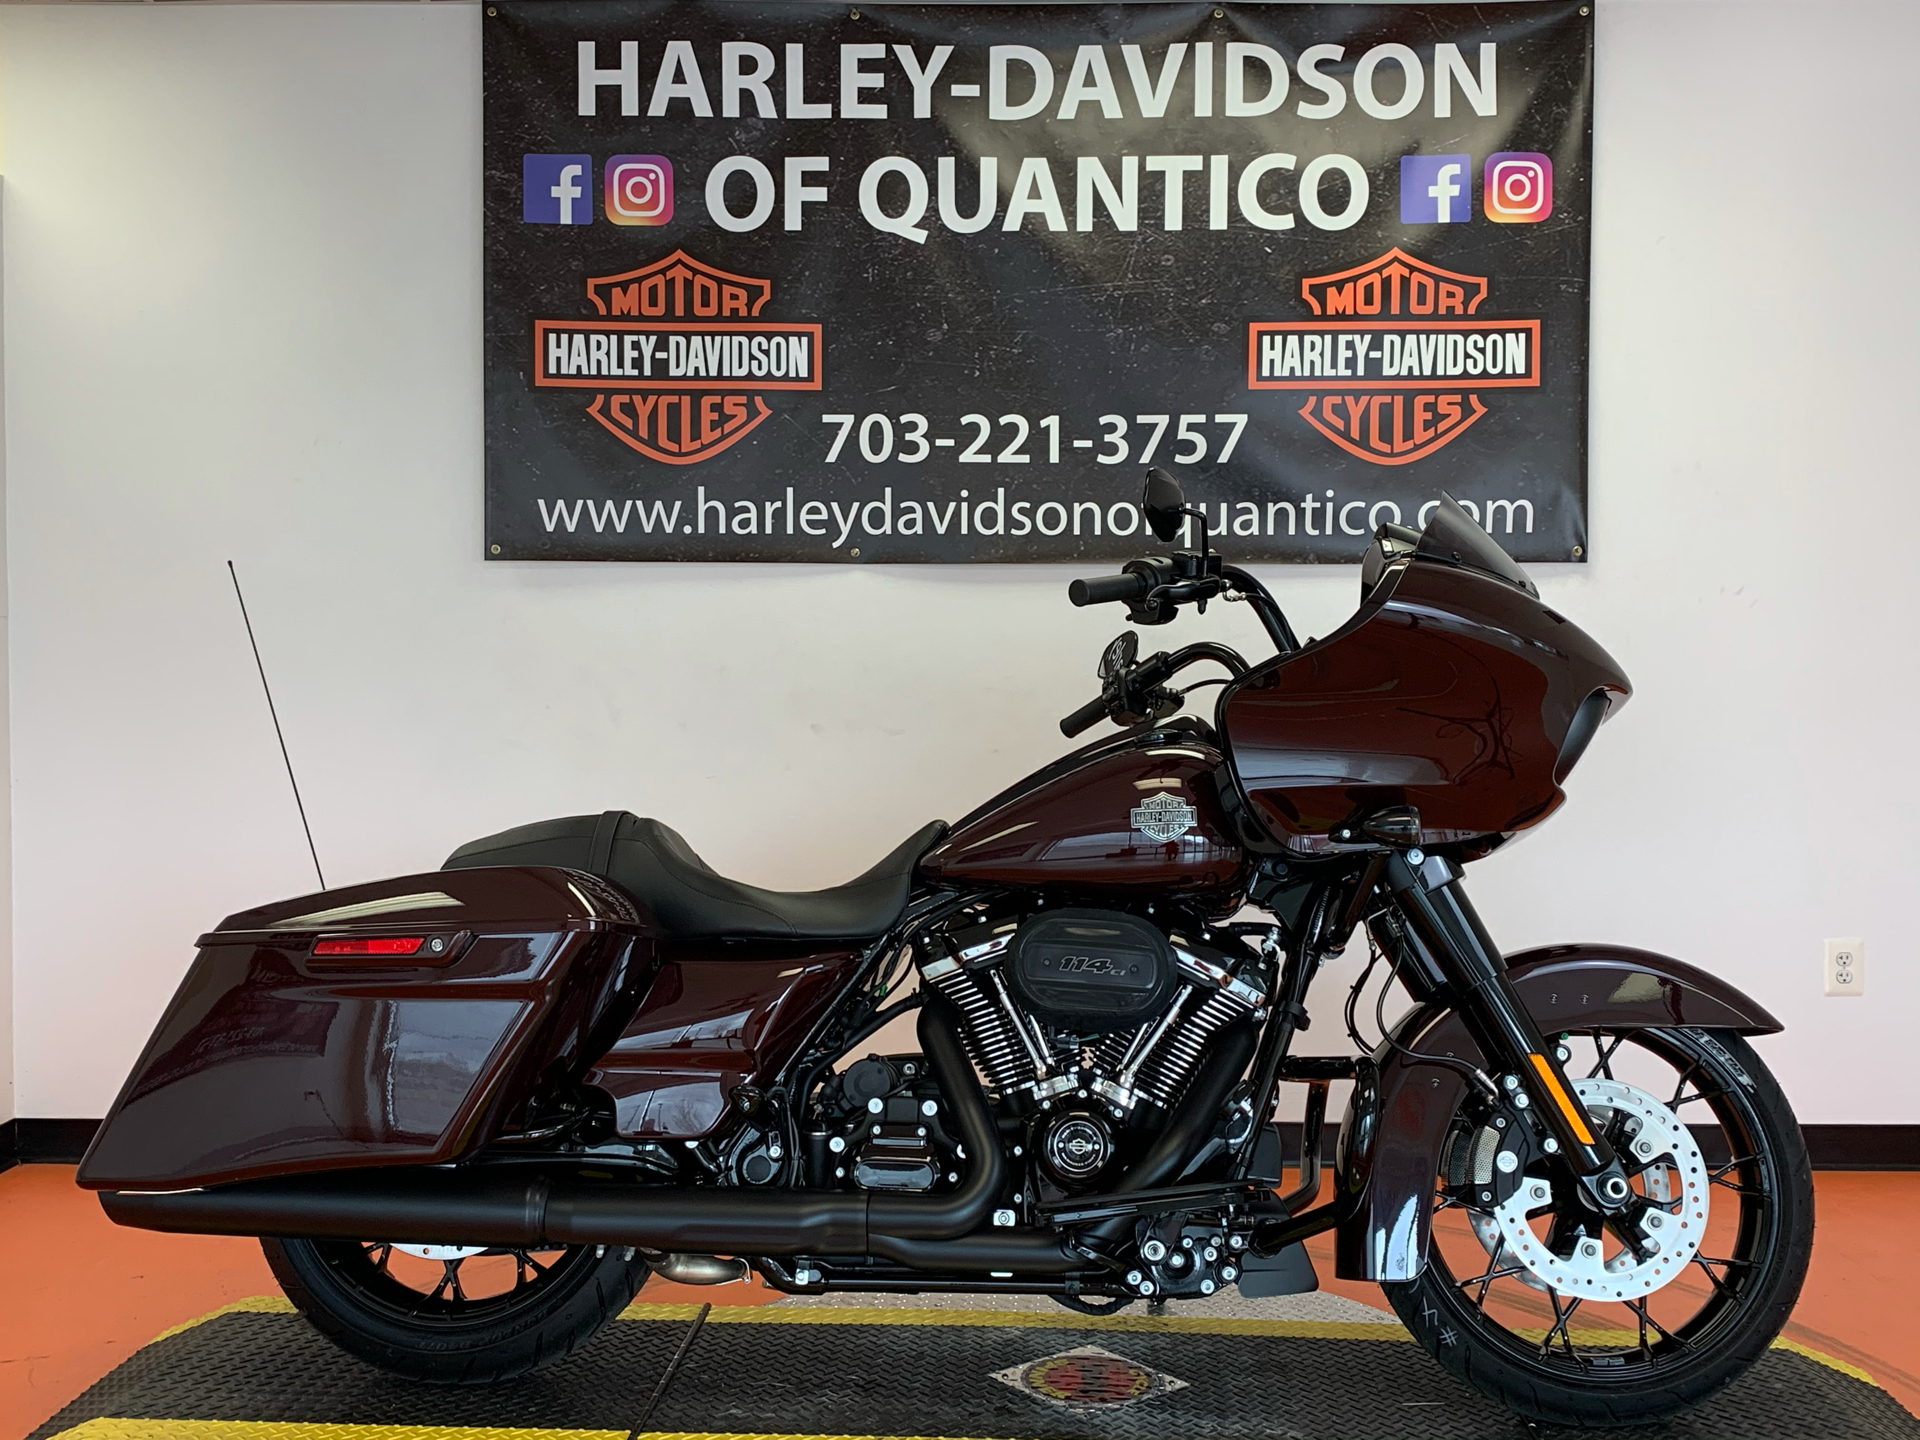 New 2021 Harley Davidson Road Glide Special Midnight Crimson Black Pearl Option Motorcycles In Dumfries Va 617287